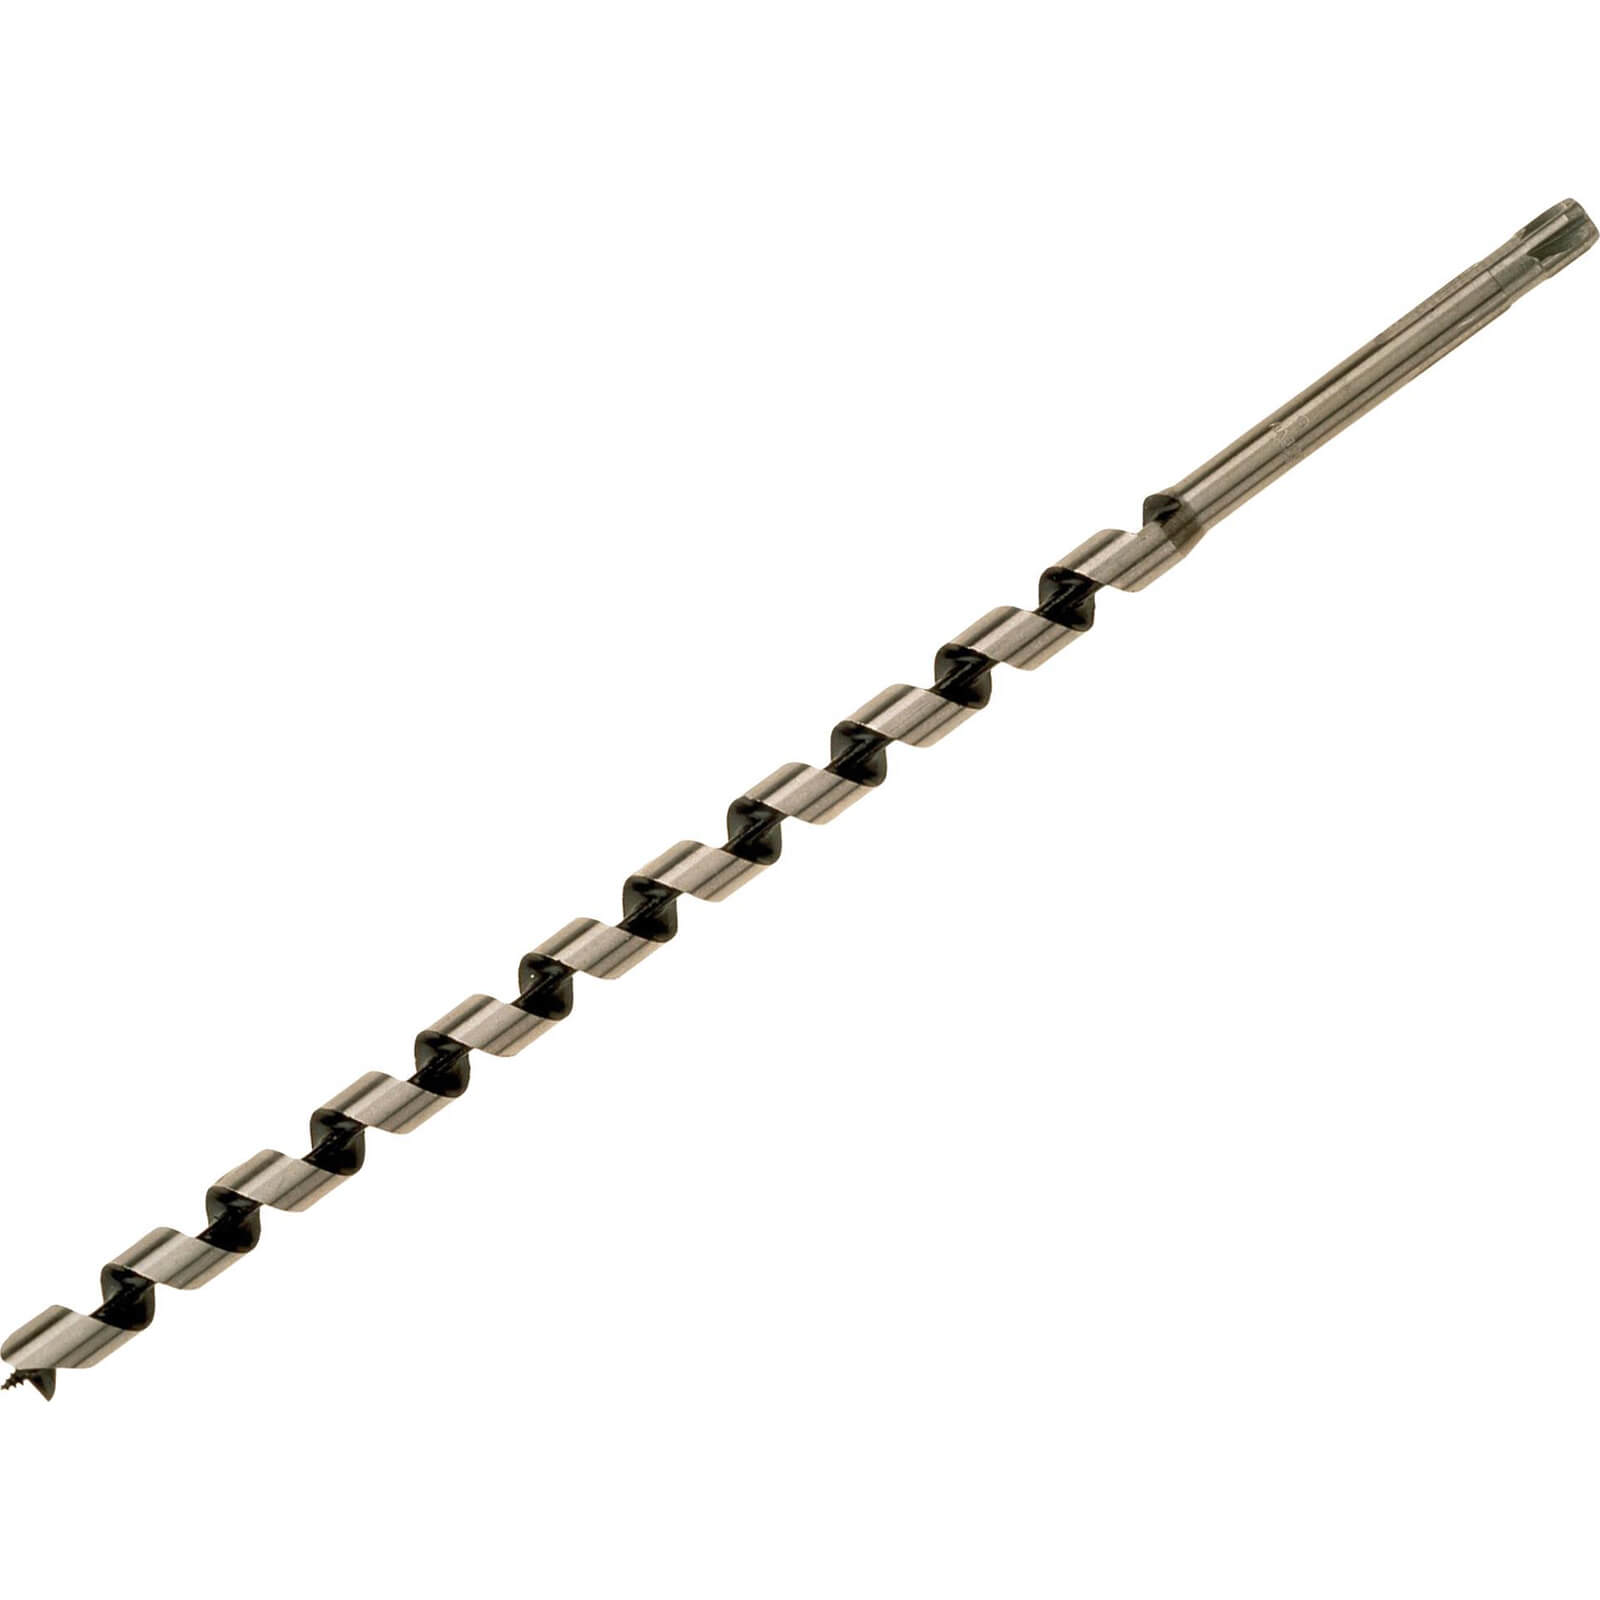 Image of Bahco 9627 Series Long Combination Auger Drill Bit 14mm 460mm